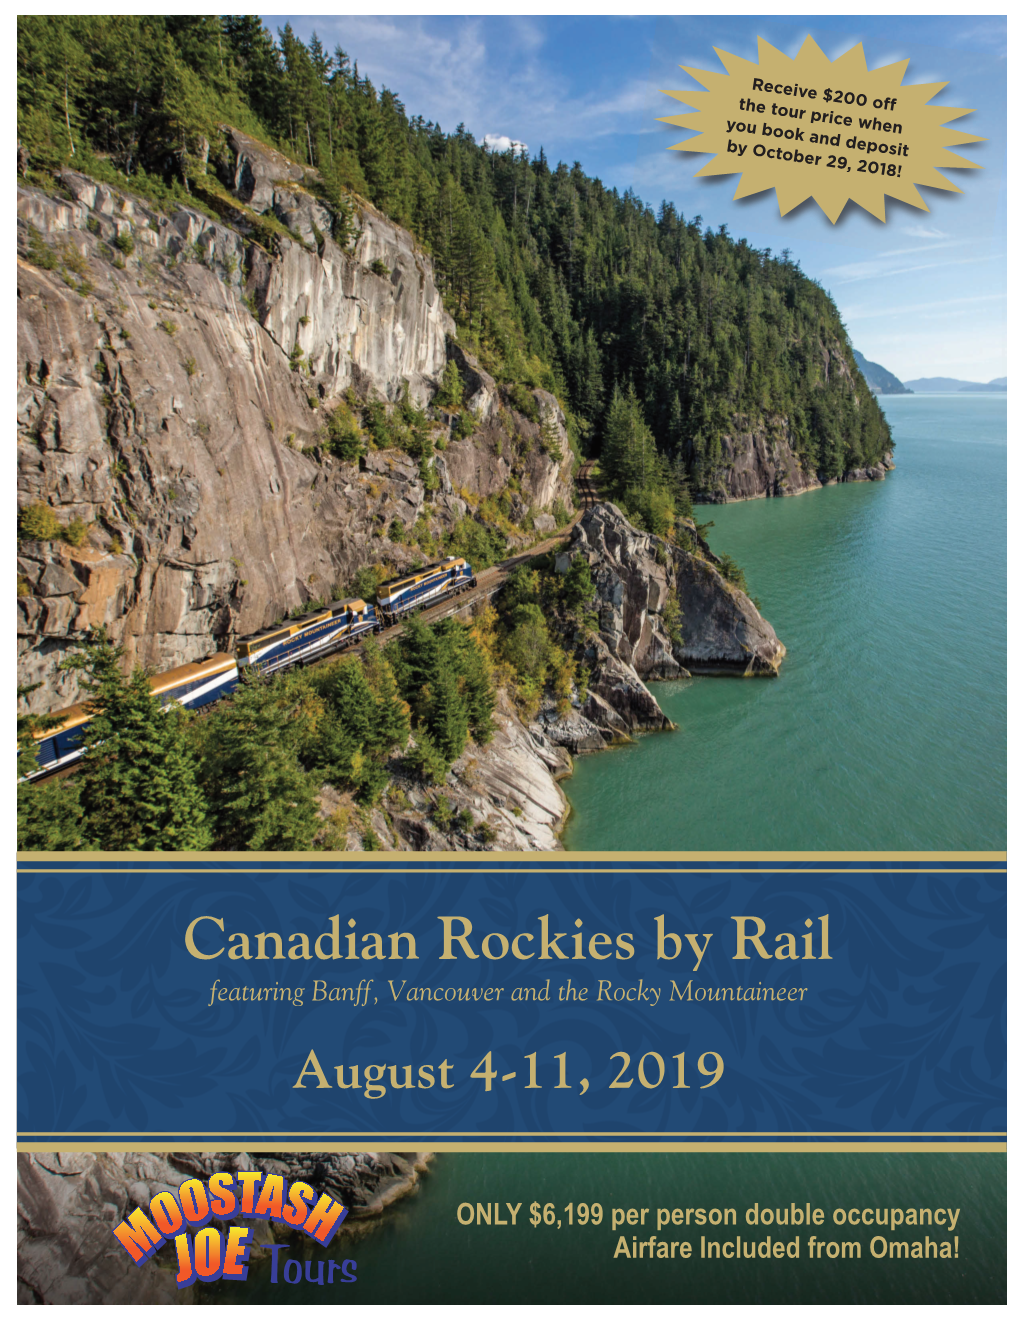 Canadian Rockies by Rail Featuring Banff, Vancouver and the Rocky Mountaineer August 4-11, 2019